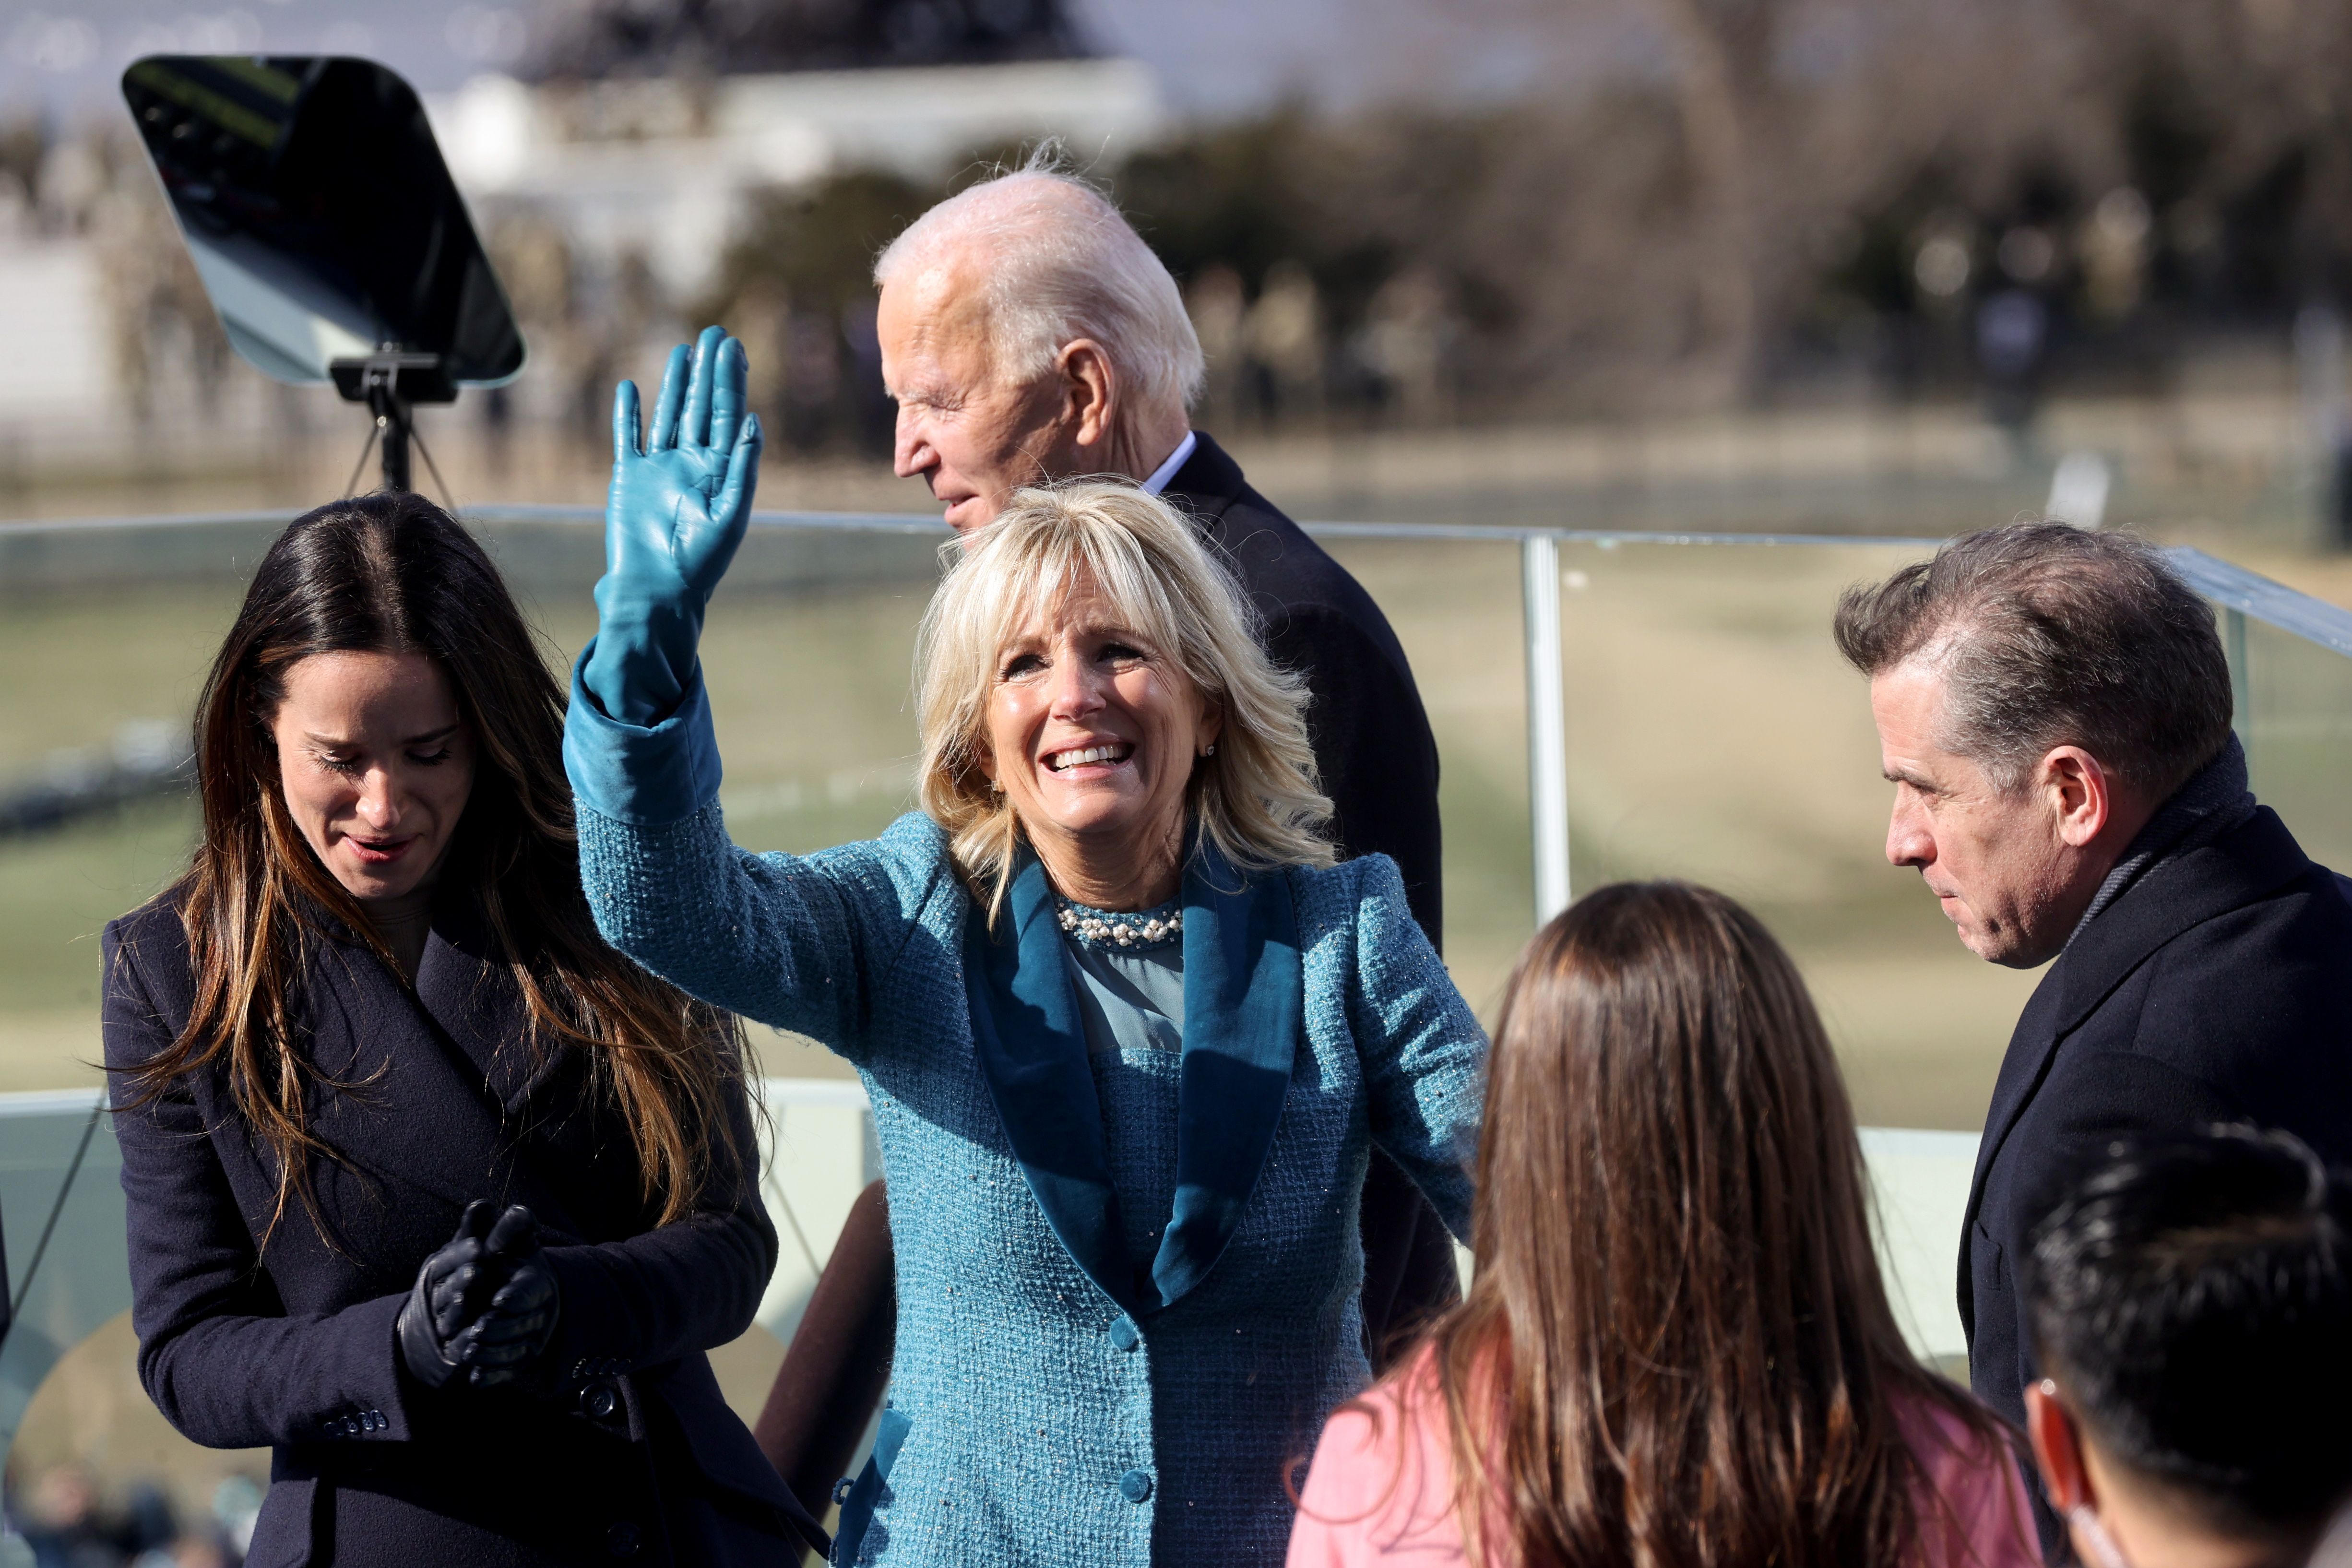 Jill Biden waves after her husband Joe Biden was sworn-in as the 46th President of the United States during the inauguration on January 20, 2021 in Washington, DC. | Photo: Getty Images